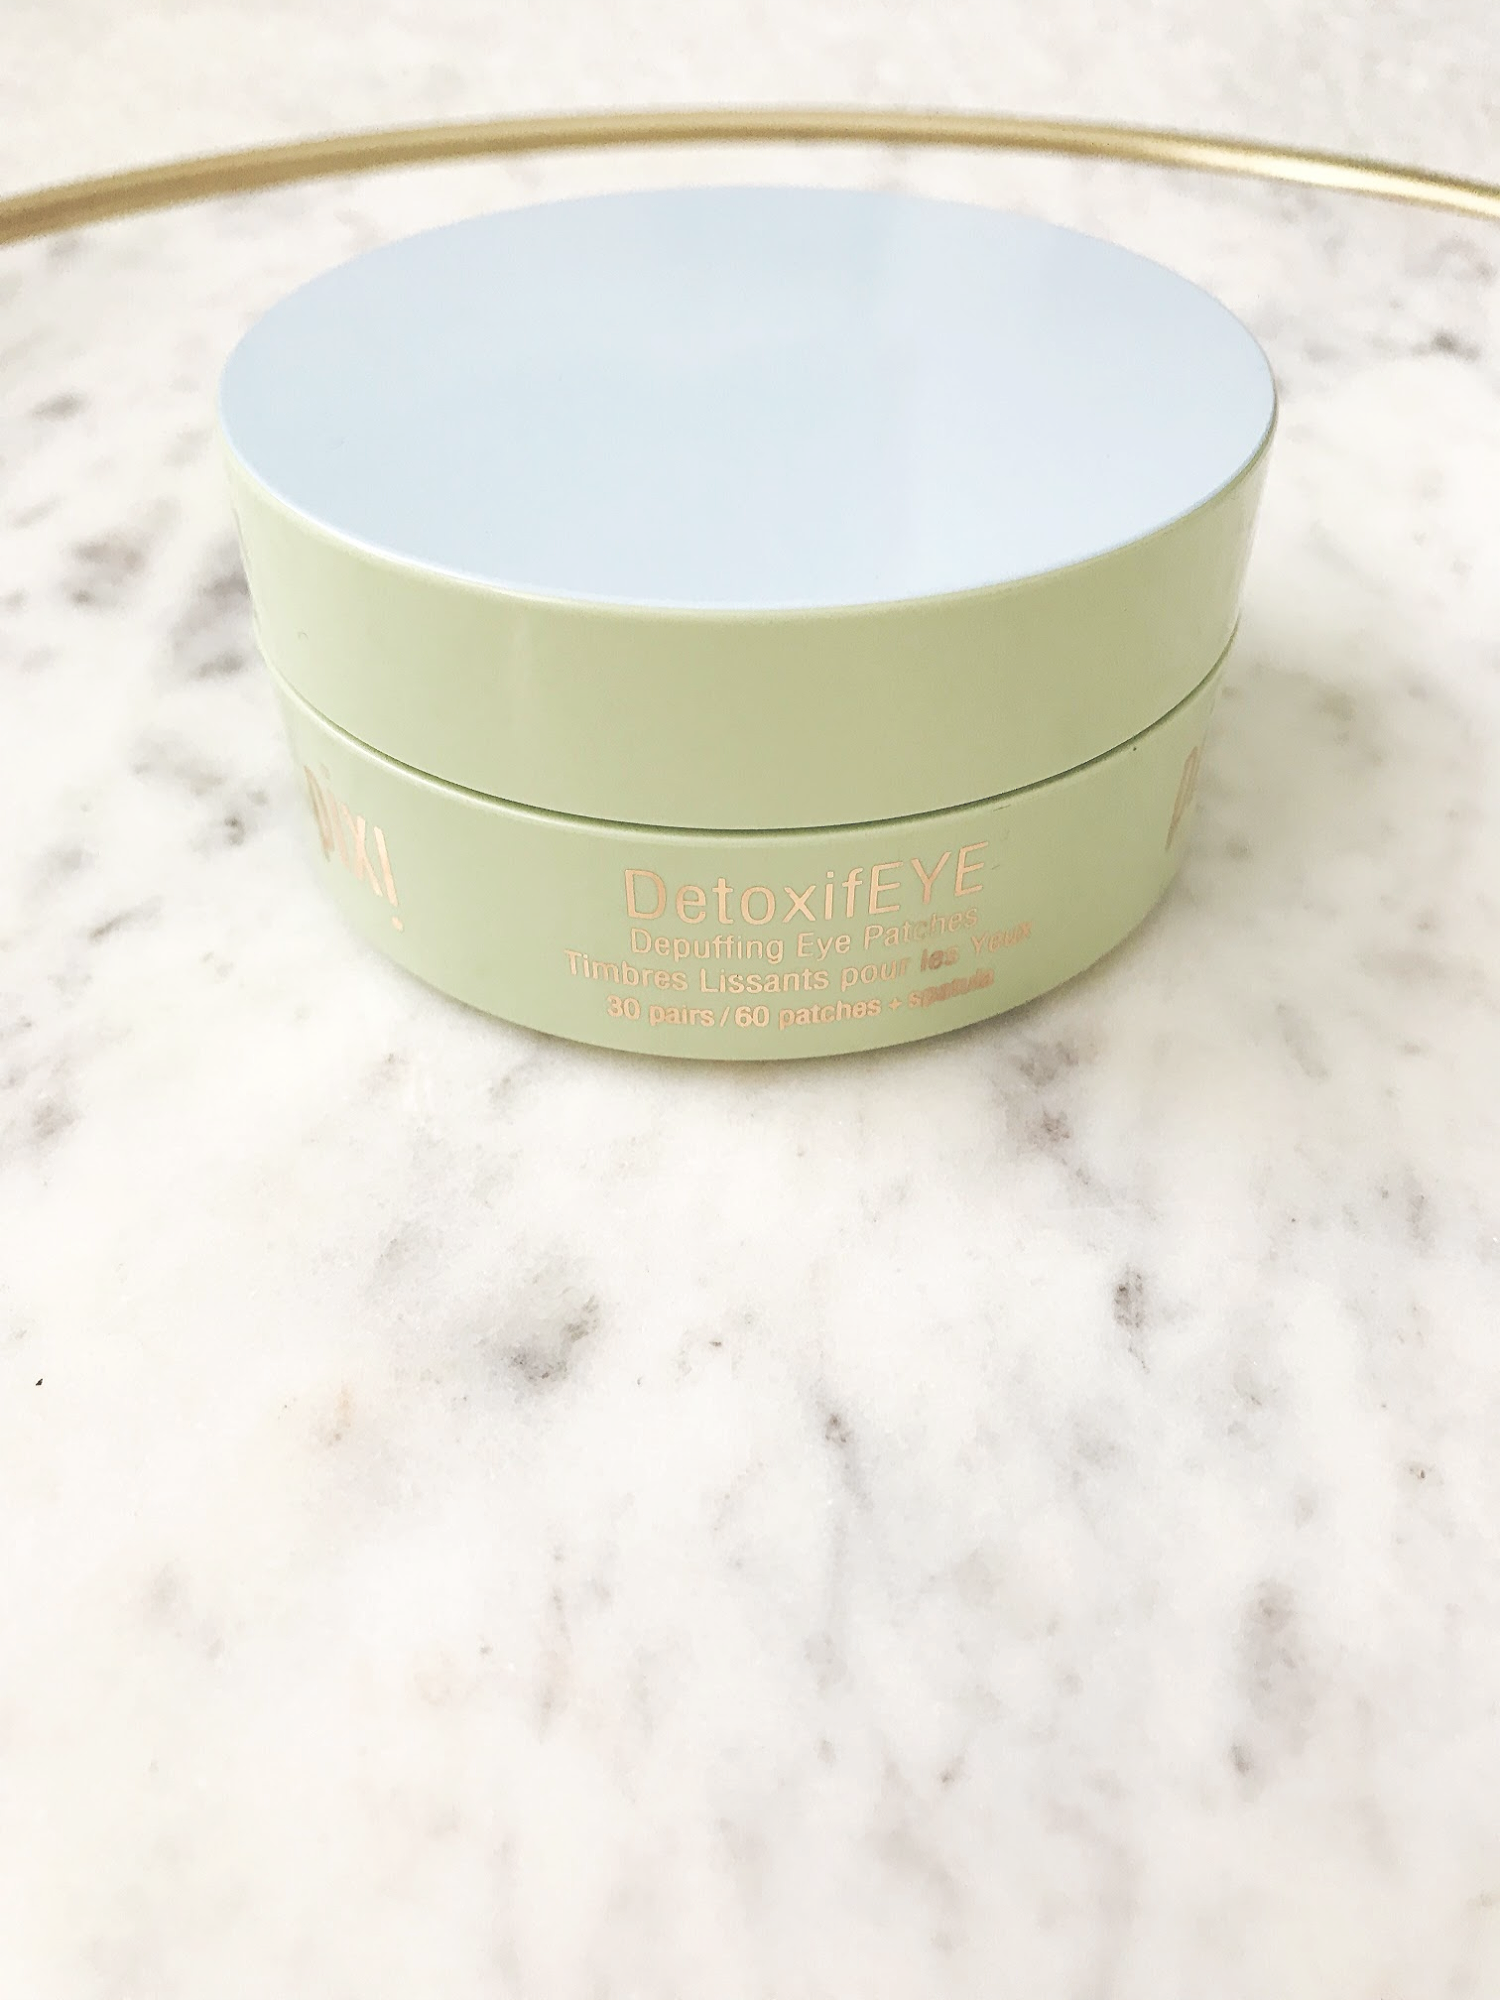 STH 6 Beauty Products I'm Currently Loving-Pixi Beauty DetoxiEye Gel Patches